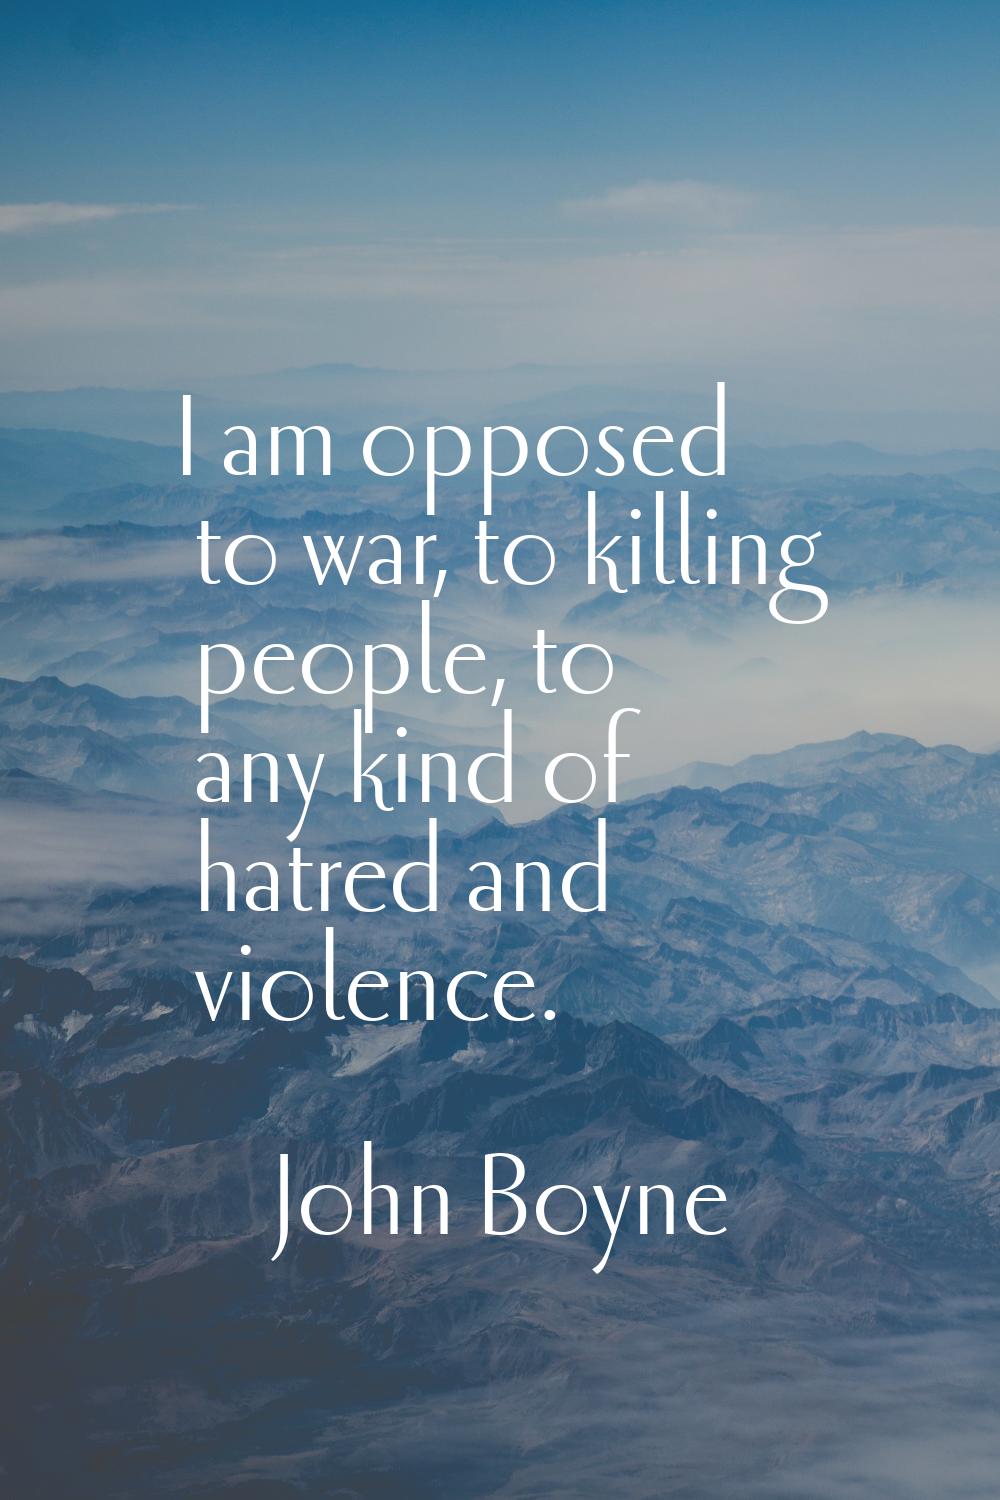 I am opposed to war, to killing people, to any kind of hatred and violence.